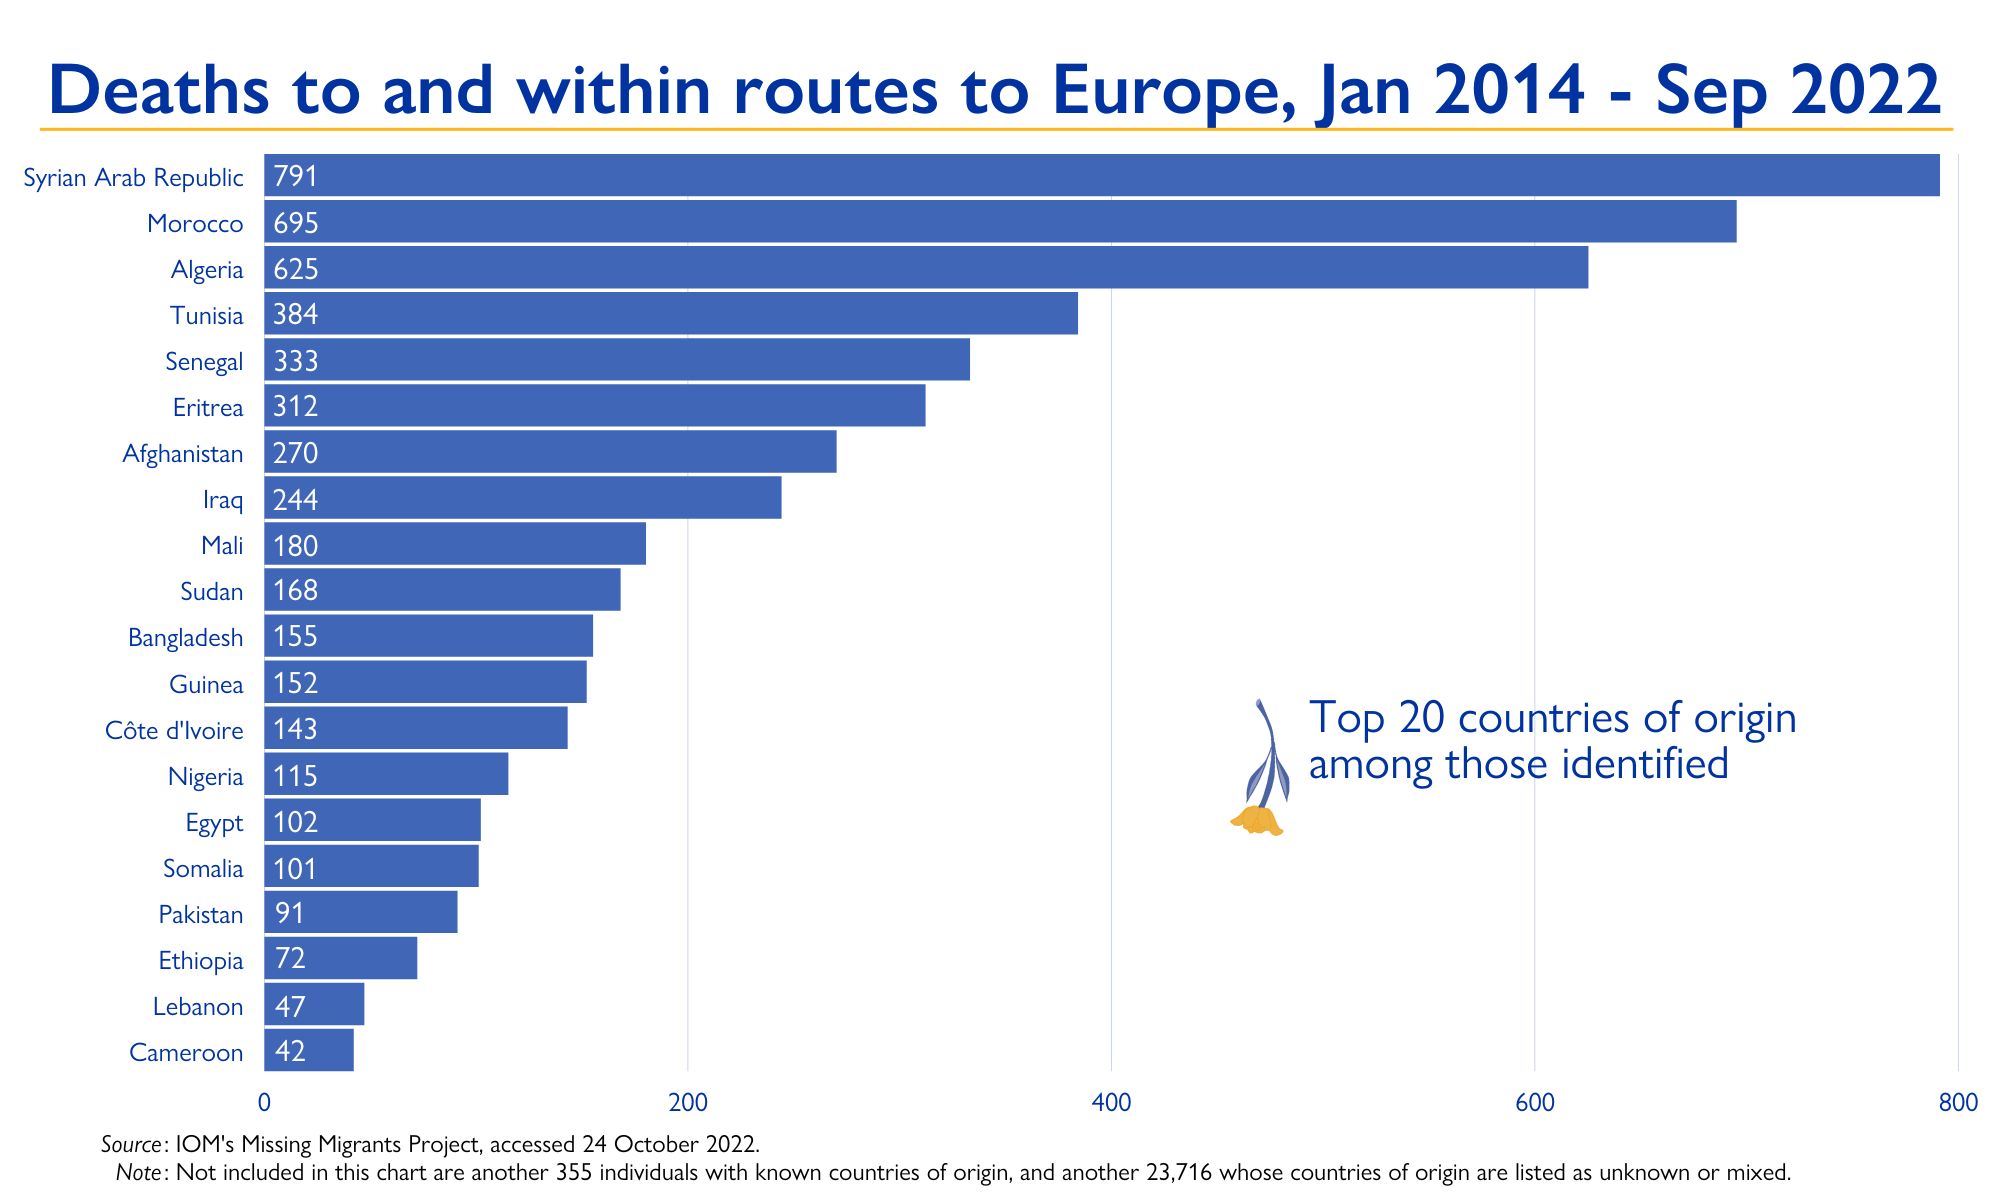 Deaths to and within routes to Europe